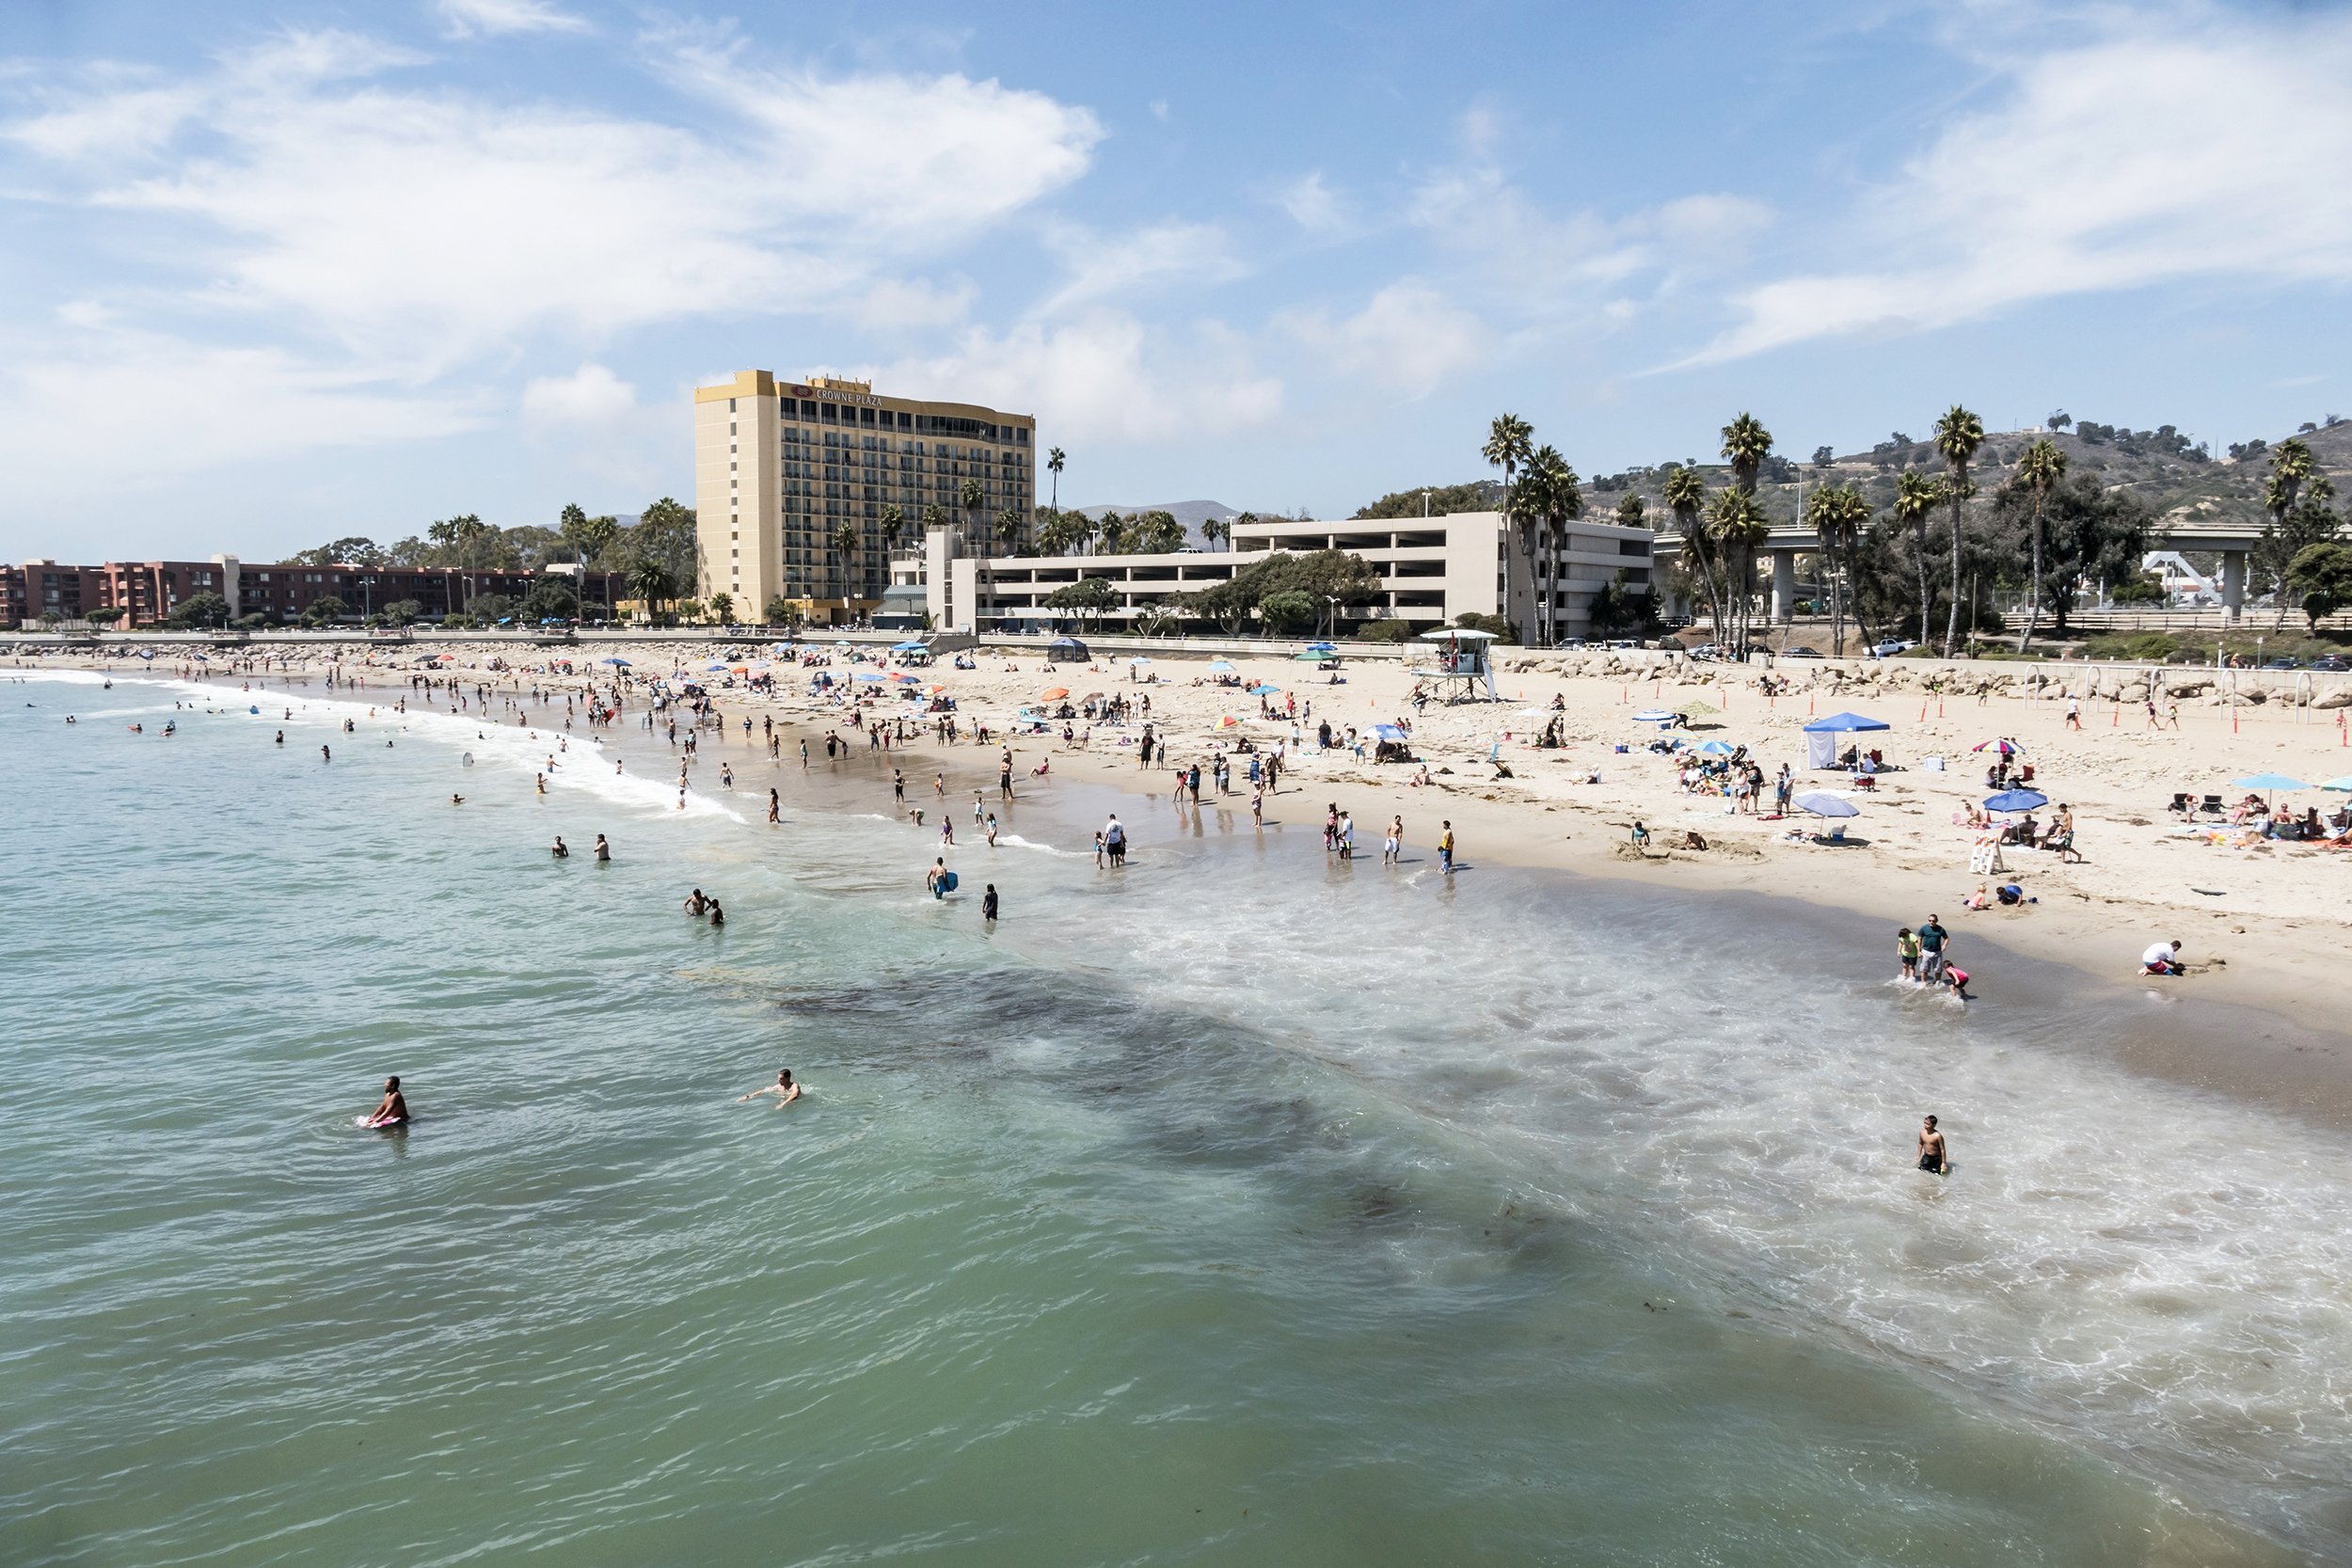 <p>Skip Santa Barbara to the north and Malibu to the south and head for the much more affordable beaches of Ventura County. <a href="https://www.tkqlhce.com/click-3559491-14430556?sid=msnshop15286-vr&url=https%3A%2F%2Fwww.hotels.com%2Fsearch.do%3Fdestination-id%3D11049605%26q-rooms%3D1%26q-room-0-adults%3D2%26q-room-0-children%3D0%26sort-order%3DBEST_SELLER">Accommodations are cheaper</a> in the area's less glamorous beach towns, where vacationers enjoy free street parking, daytime lifeguards, piers, volleyball courts, and beaches that rival the beauty of the more upscale spots nearby. Top beach options include Port Hueneme Beach Park (where there’s picnic tables, barbecue pits, volleyball courts, and a 24-hour fishing pier,) as well as Surfer’s Point Beach, Emma Wood State Beach, and Silver Strand Beach, known for its surfing, fishing, and family-friendly atmosphere.</p>